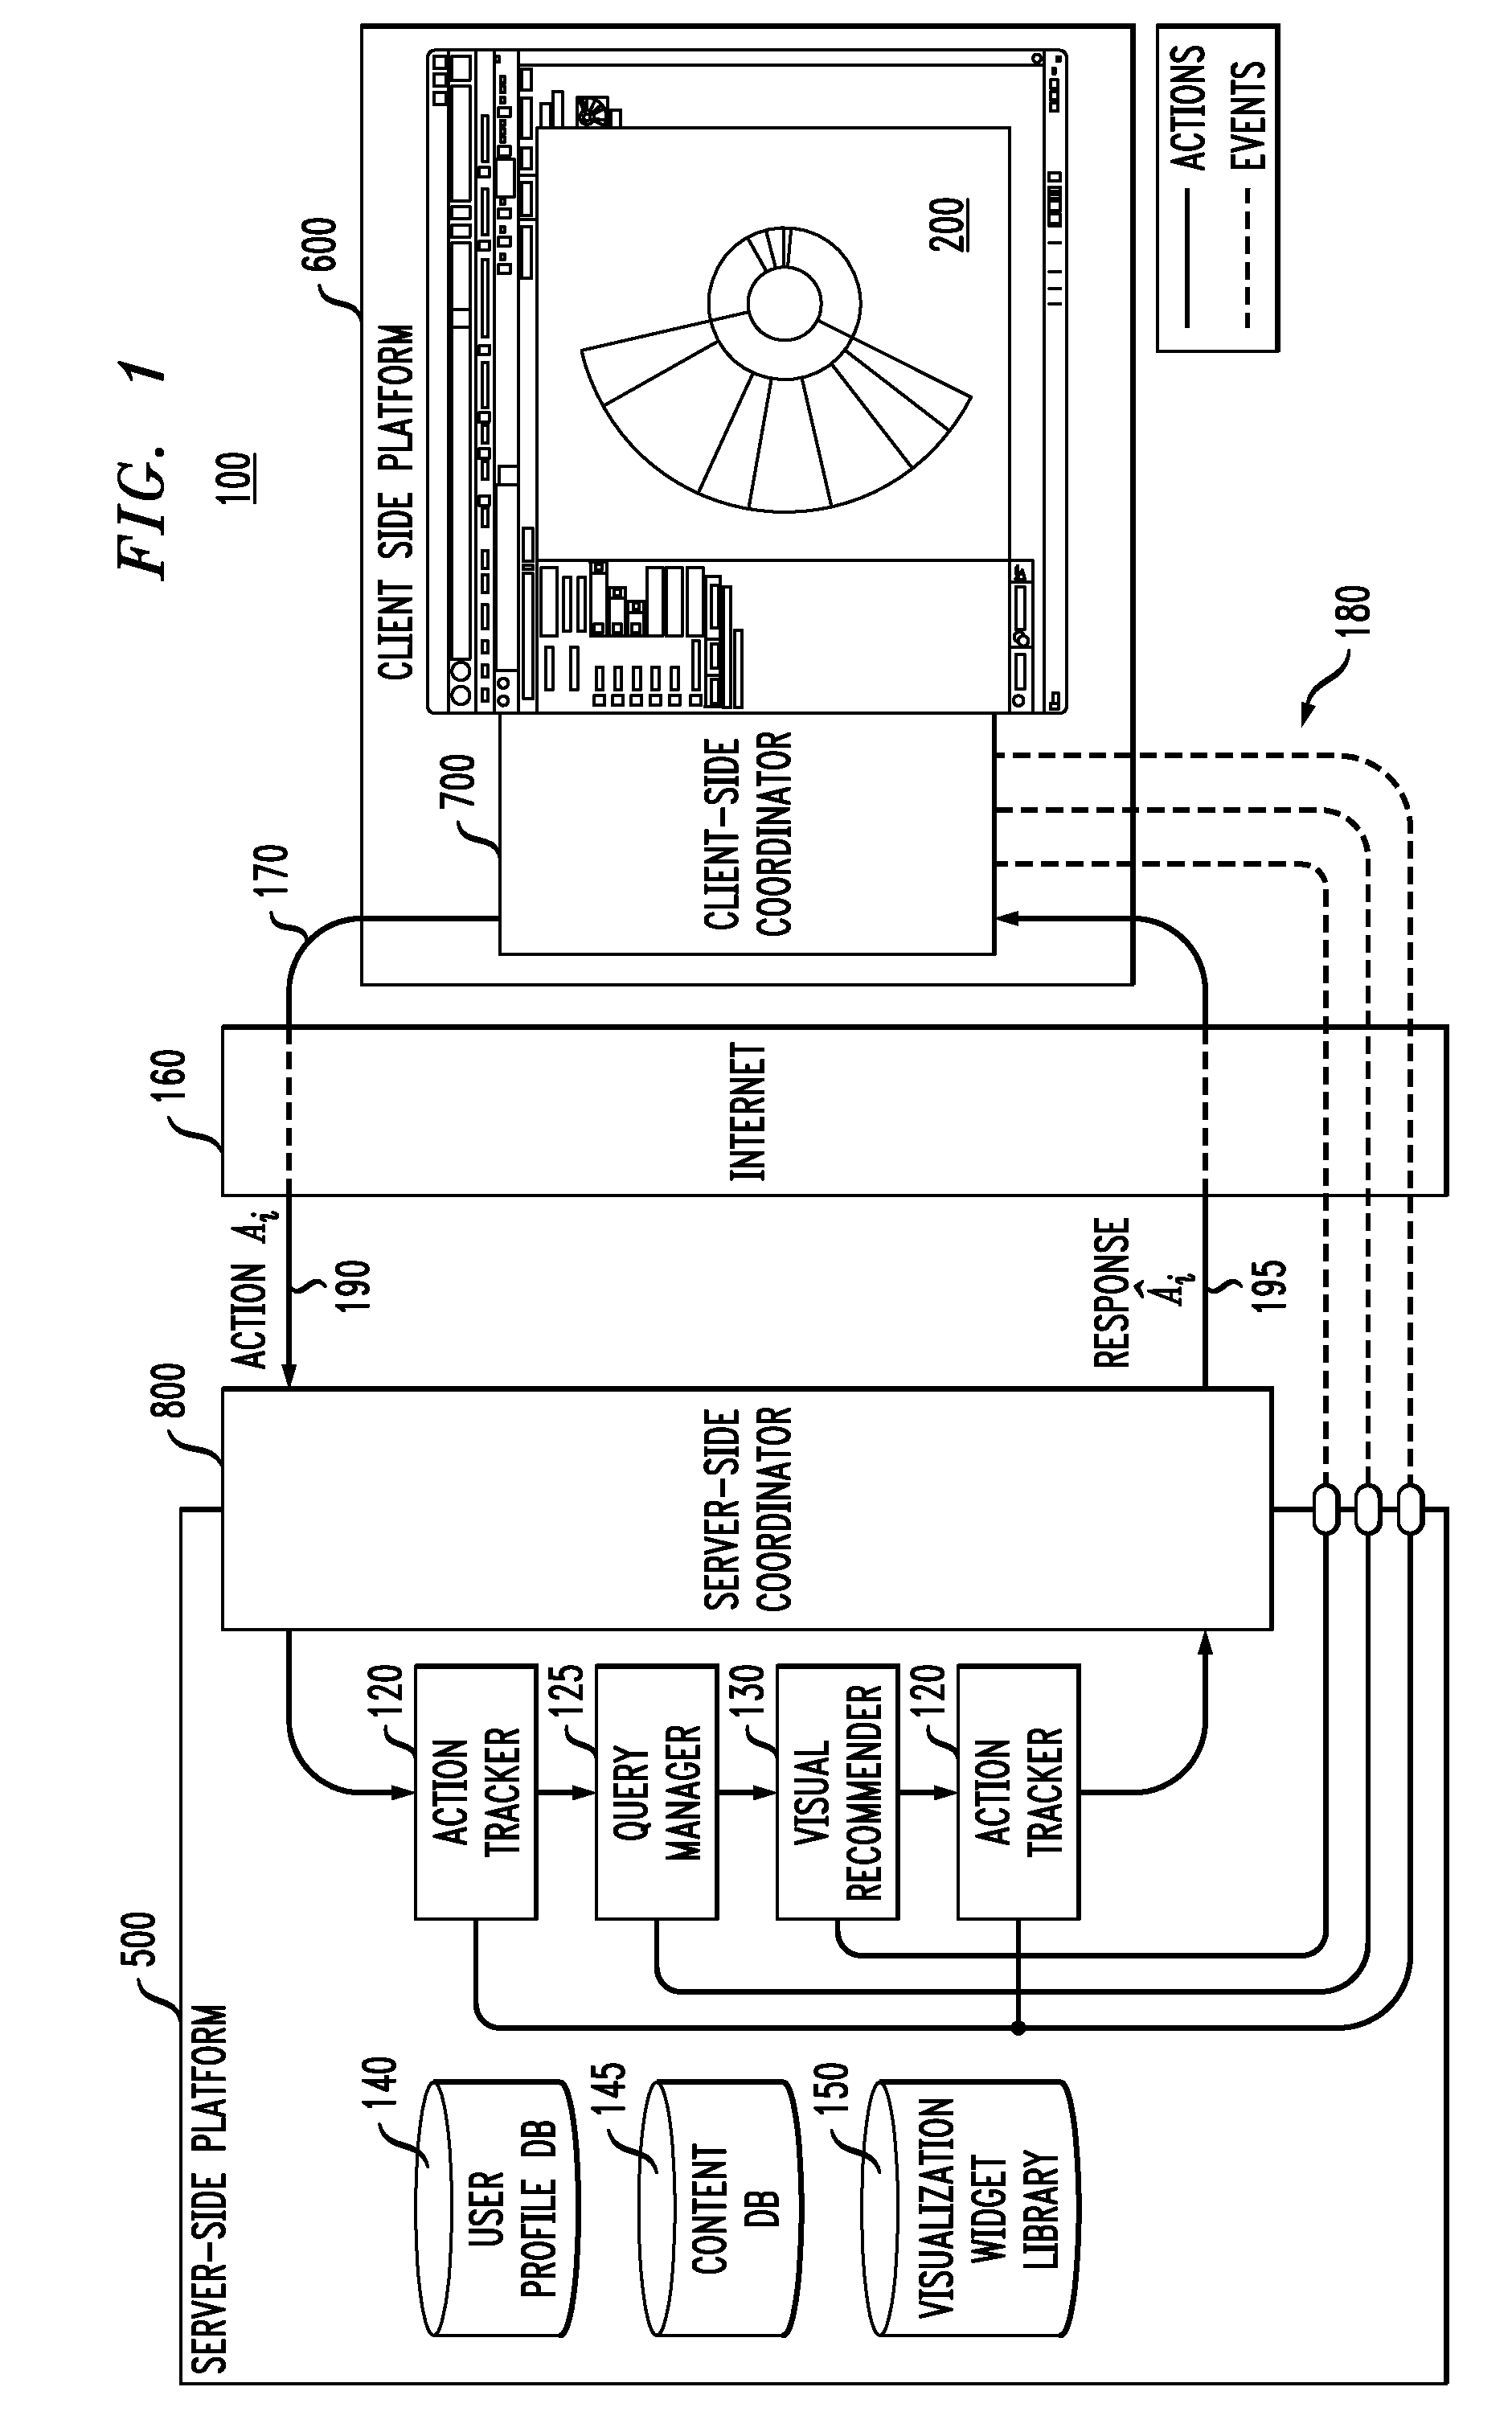 Methods and apparatus for intelligent exploratory visualization and analysis